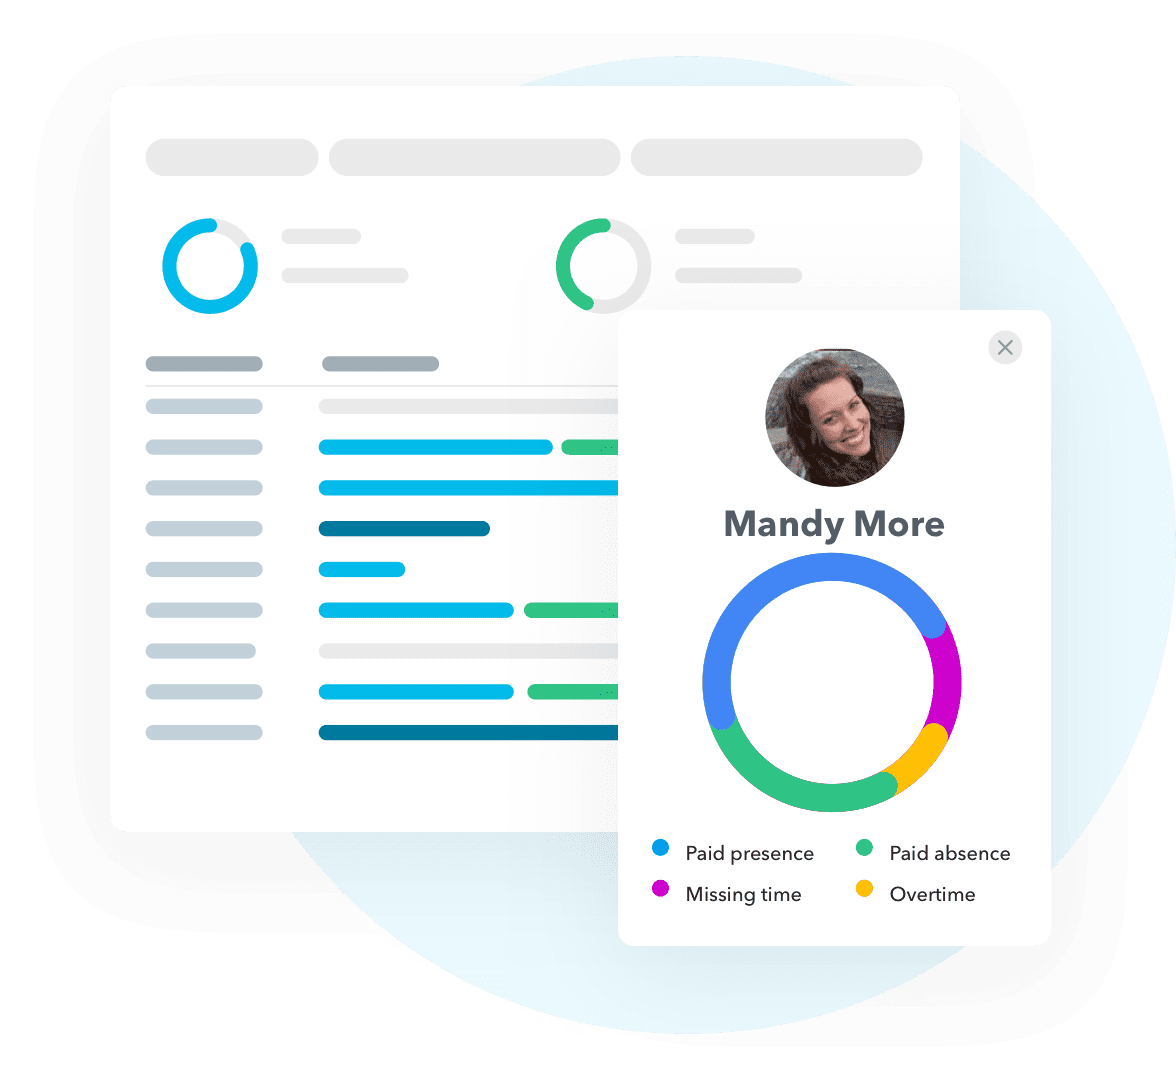 Optimize productivity based on HR reports